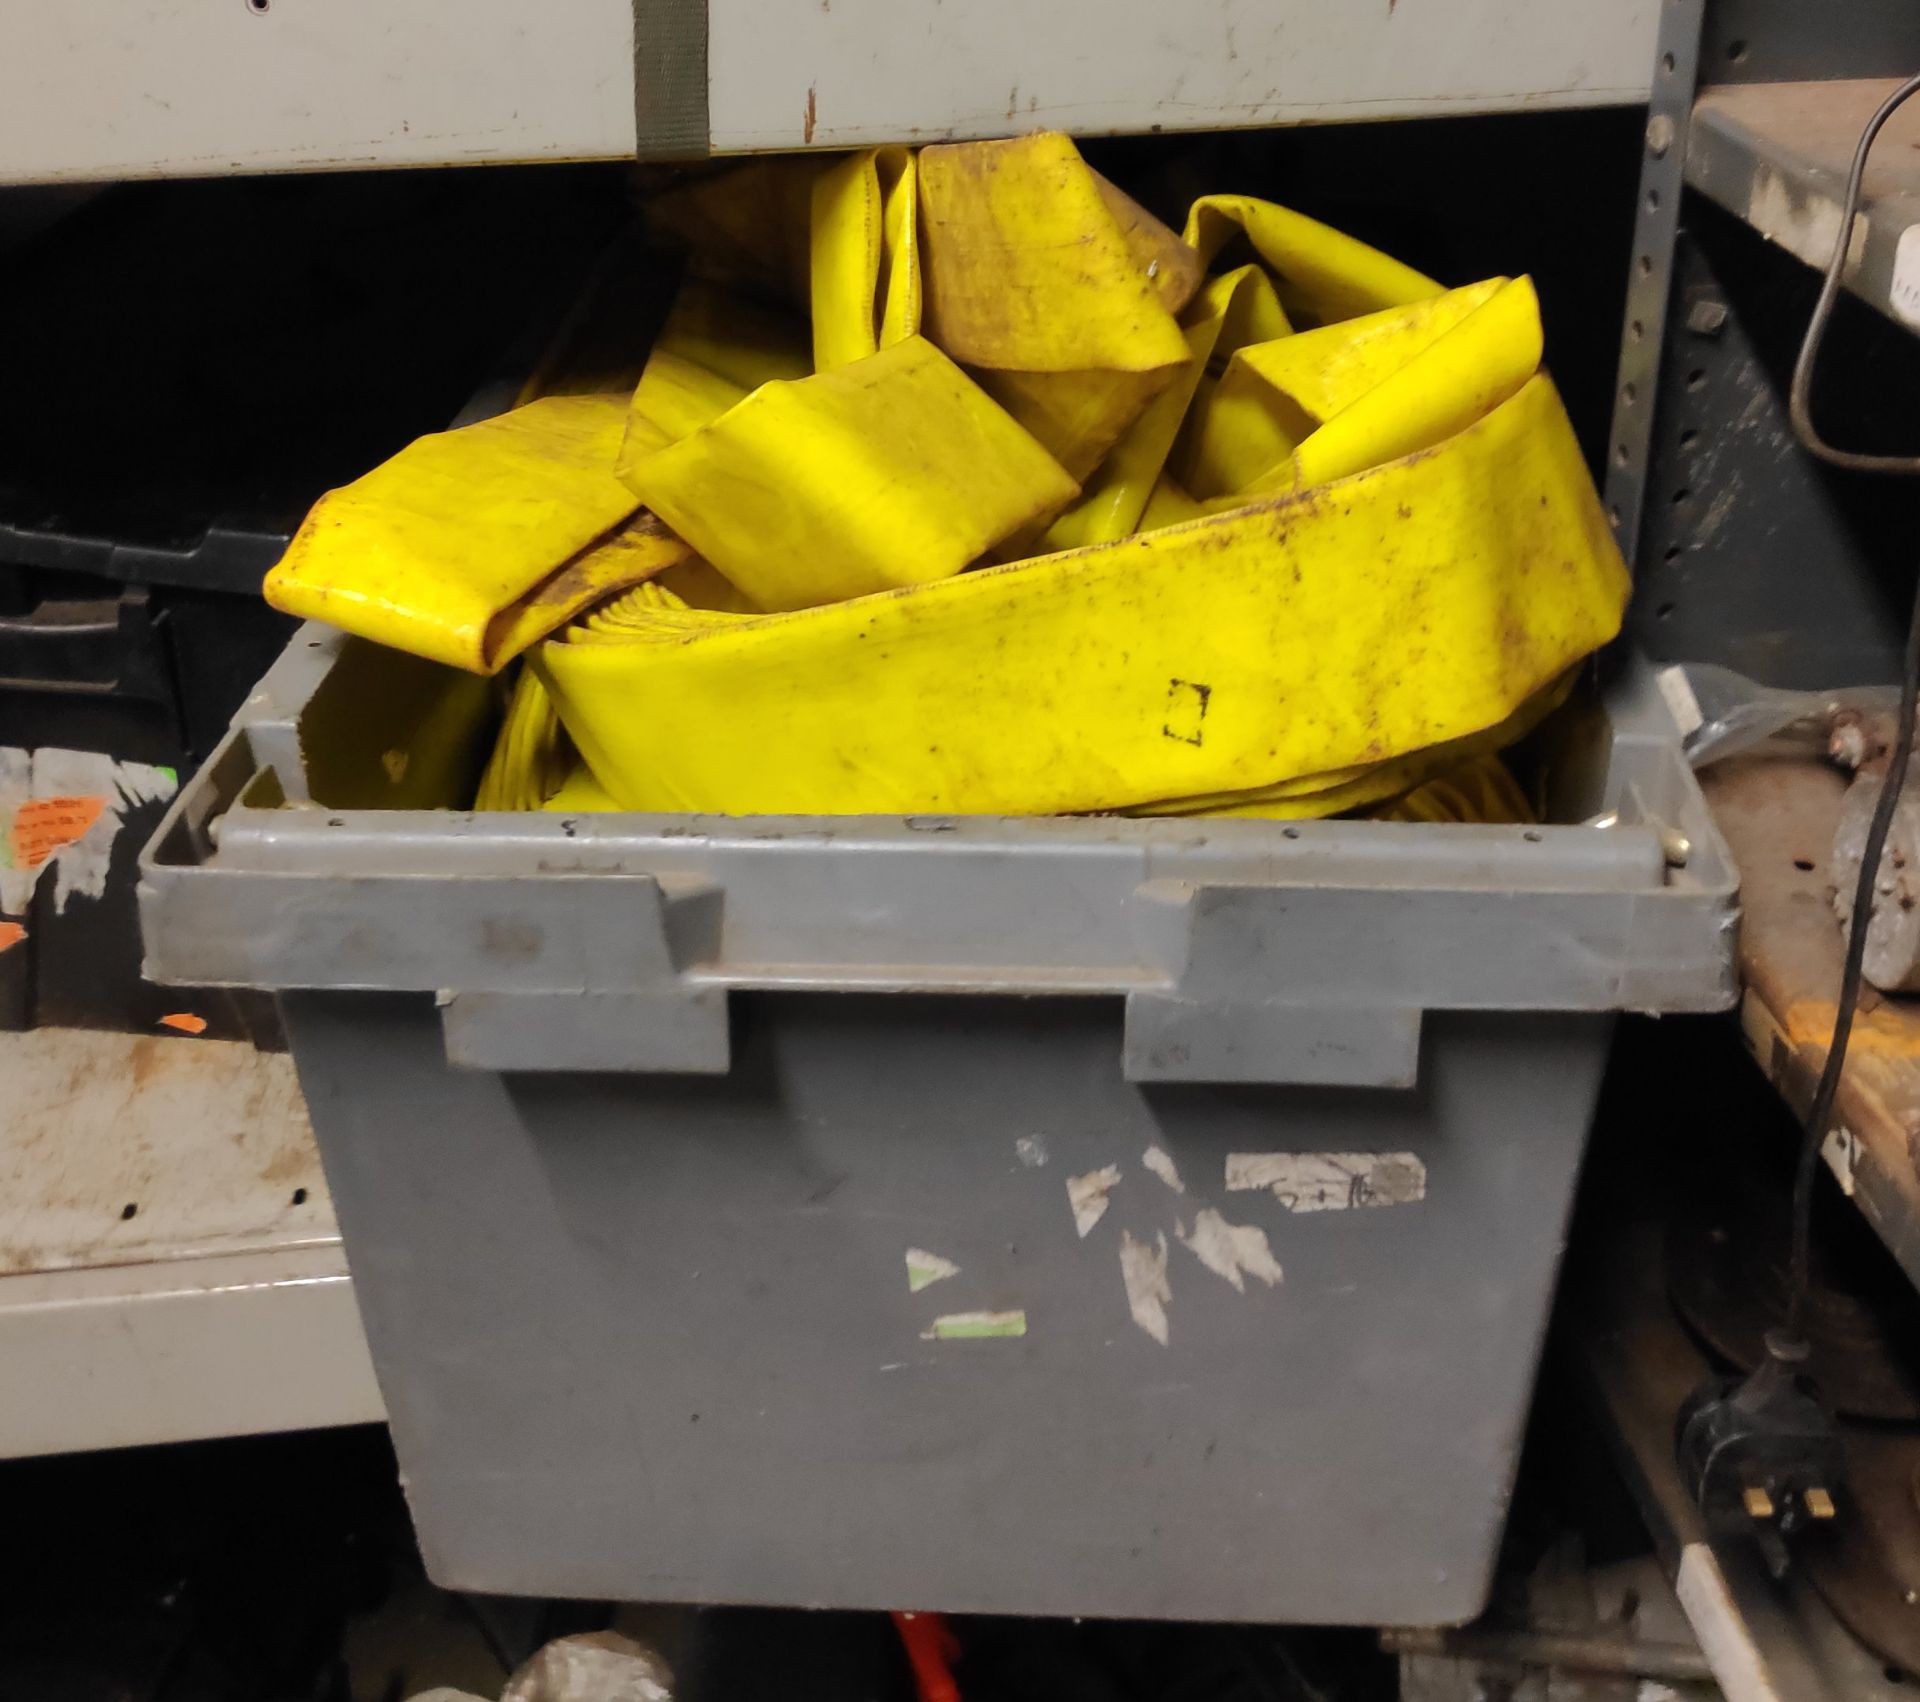 3 Rolls of Yellow 2 Inch High Pressure Hose - CL682 - Location: Bedford NN29 - Image 2 of 2